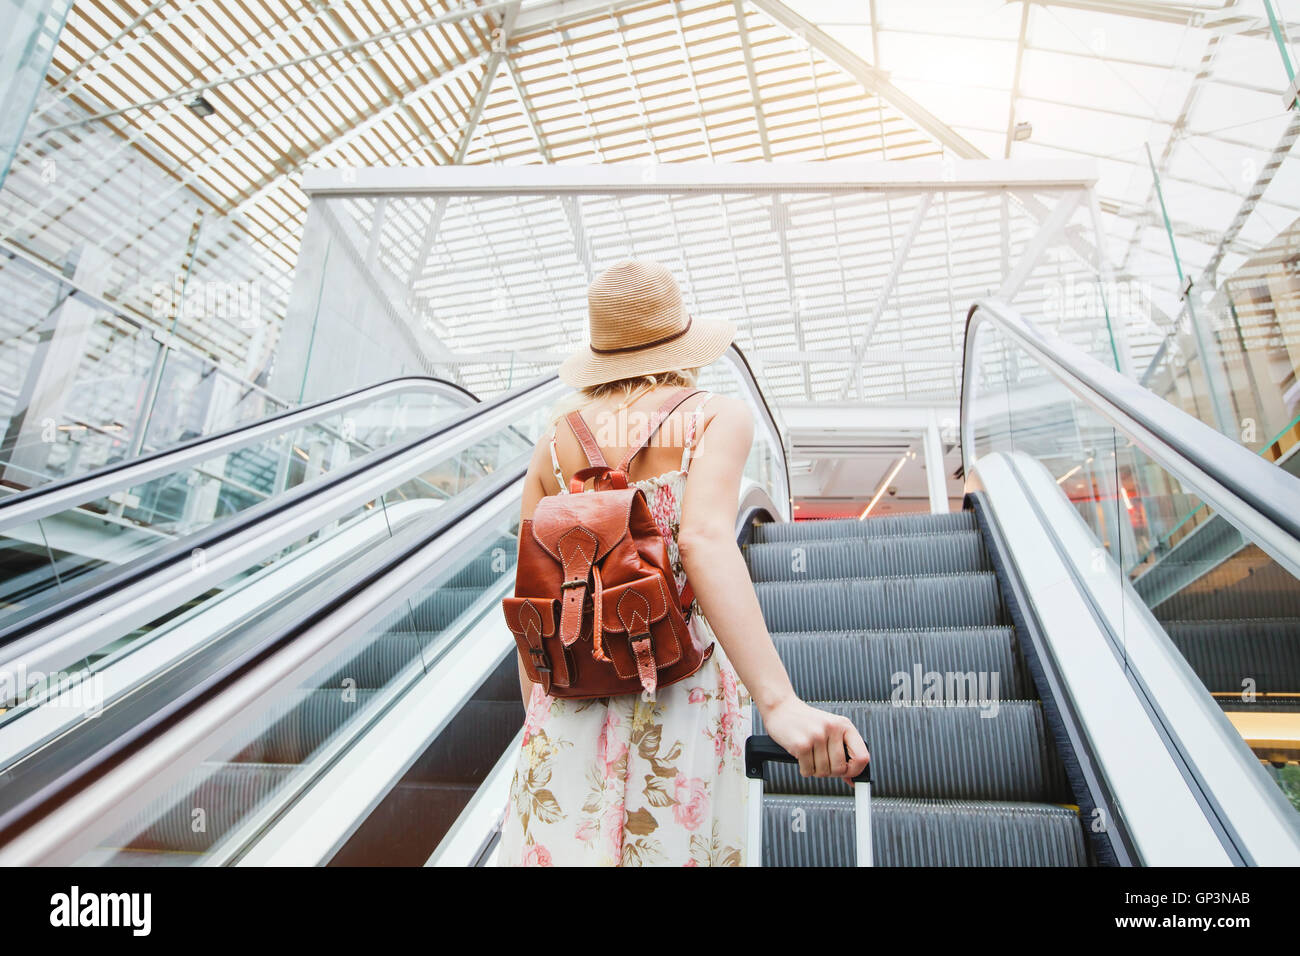 woman in modern airport, people traveling with luggage Stock Photo